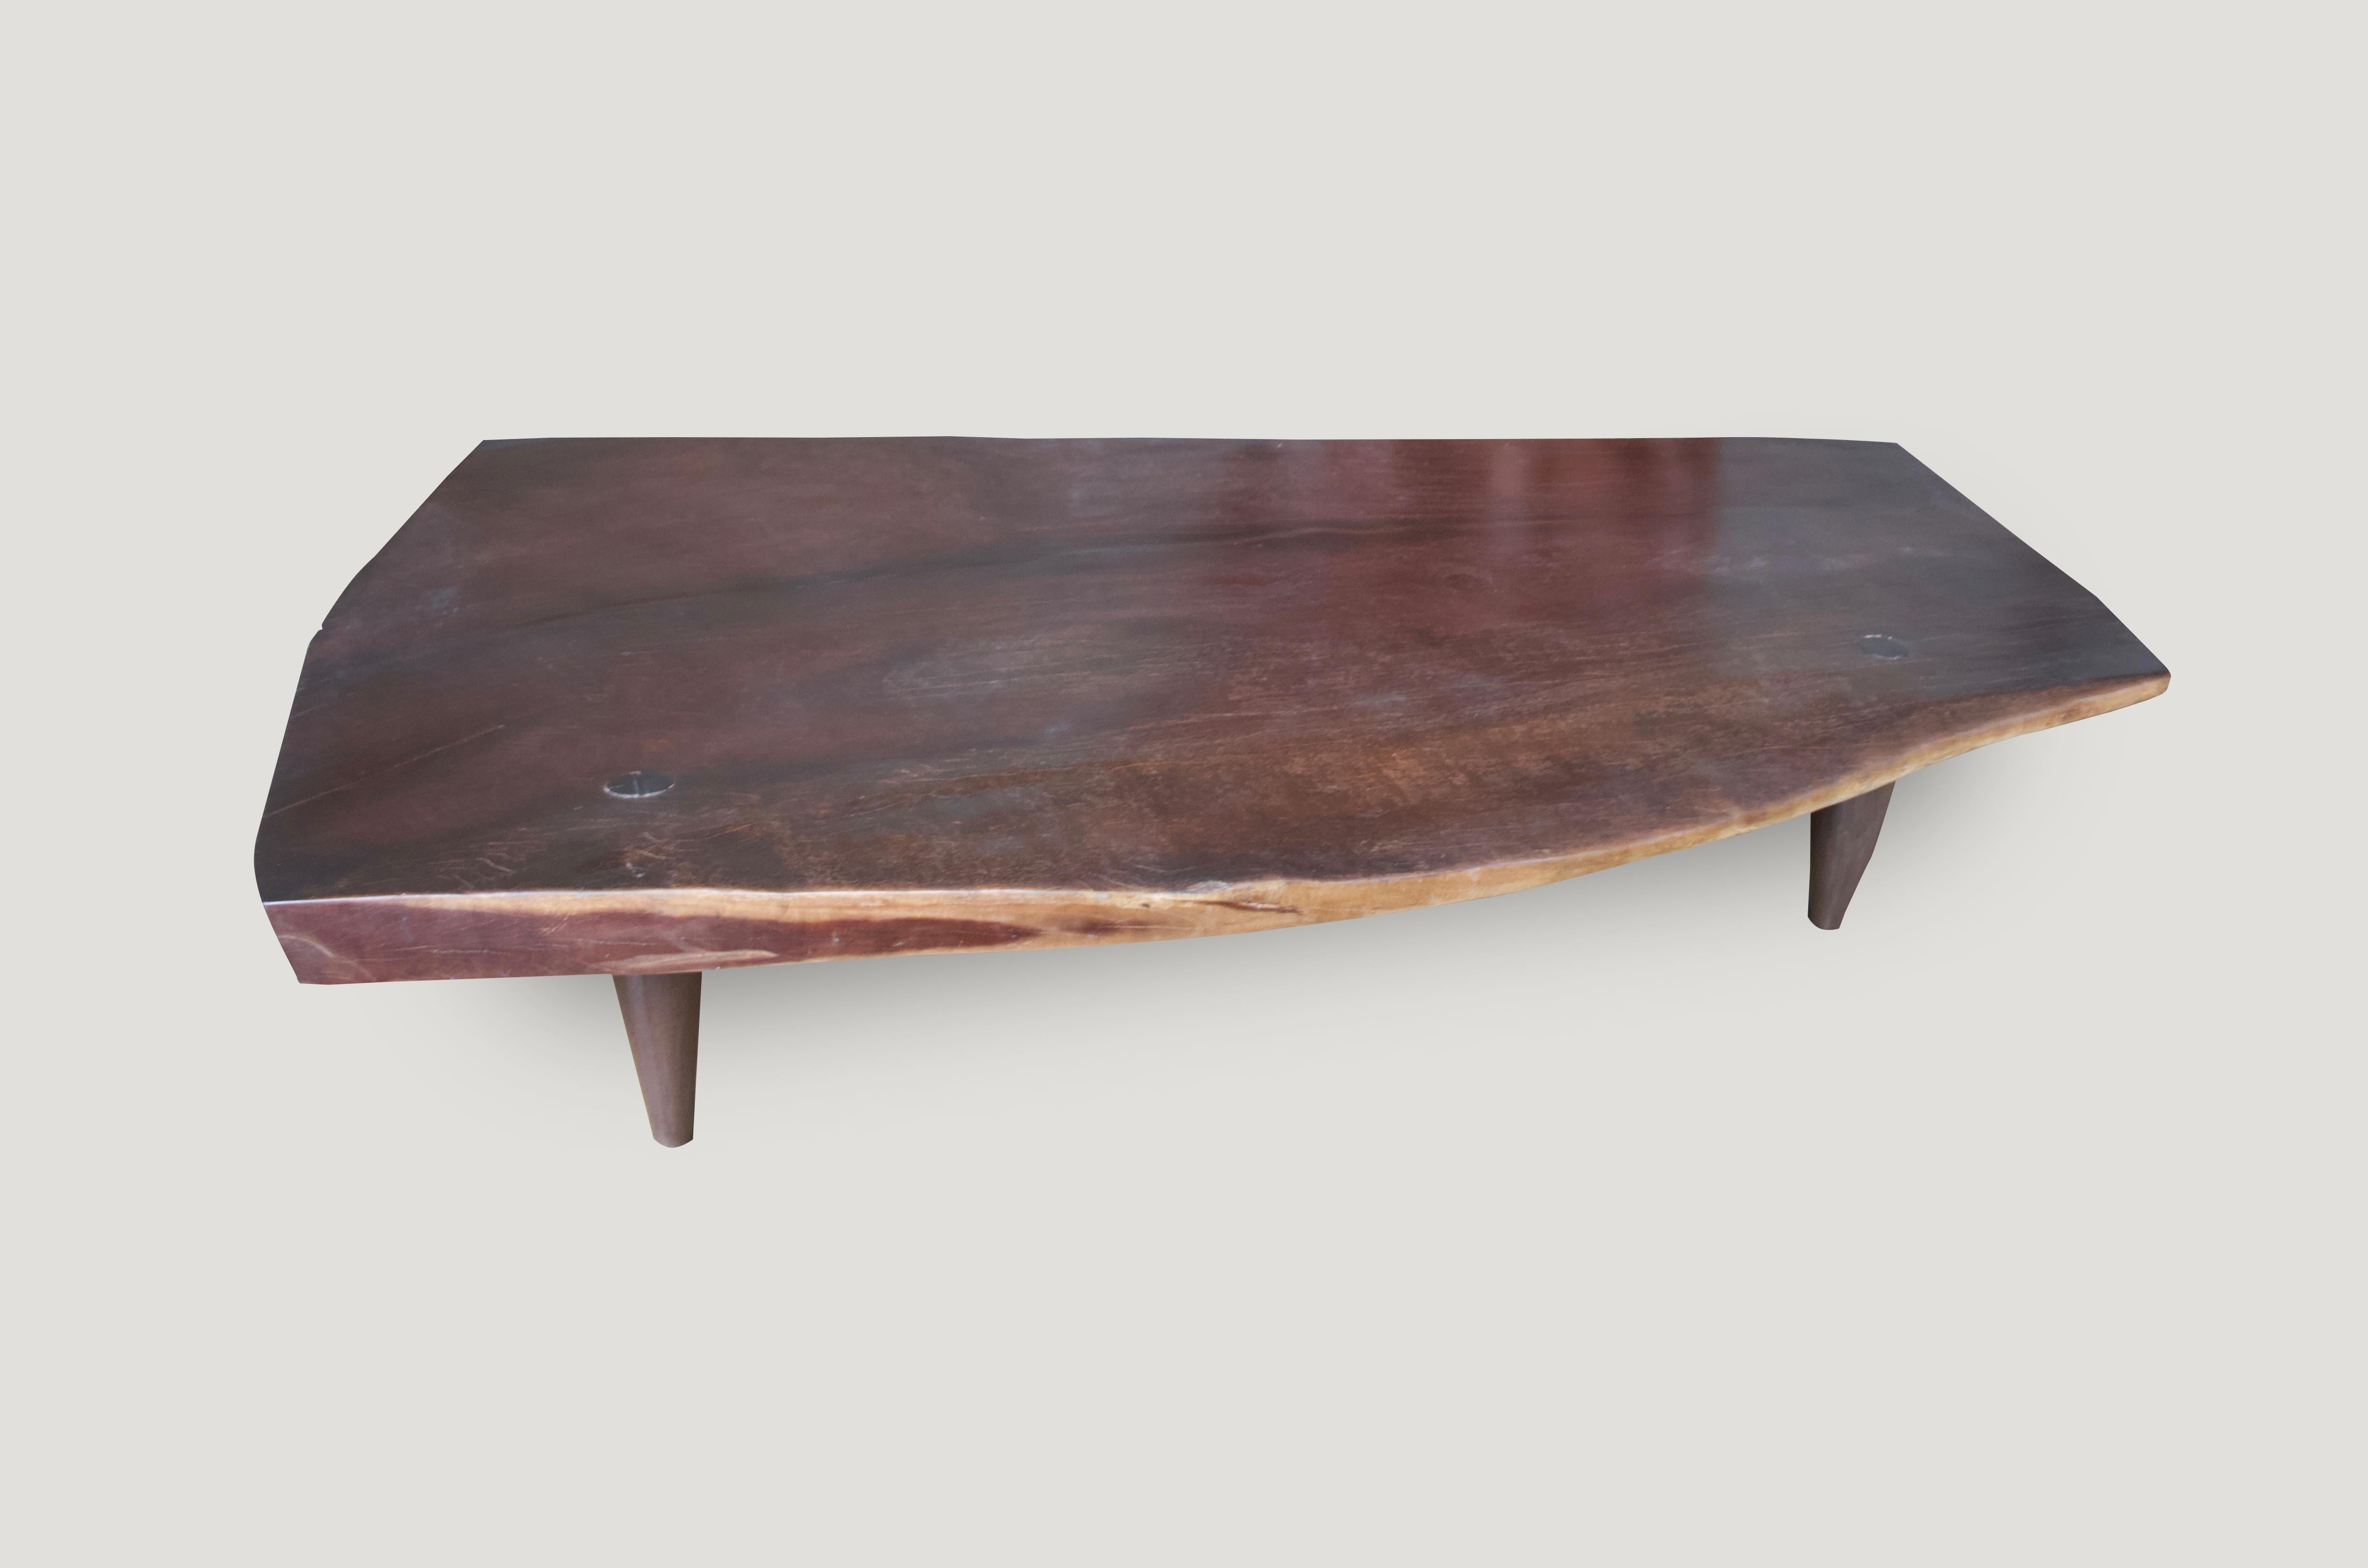 Impressive museum quality, single three inch slab coffee table. We added midcentury style legs. We will never find wood like this again. This can also be stained/charred black if preferred. Rare.

Measures: 89 x 55-32” wide x 17”